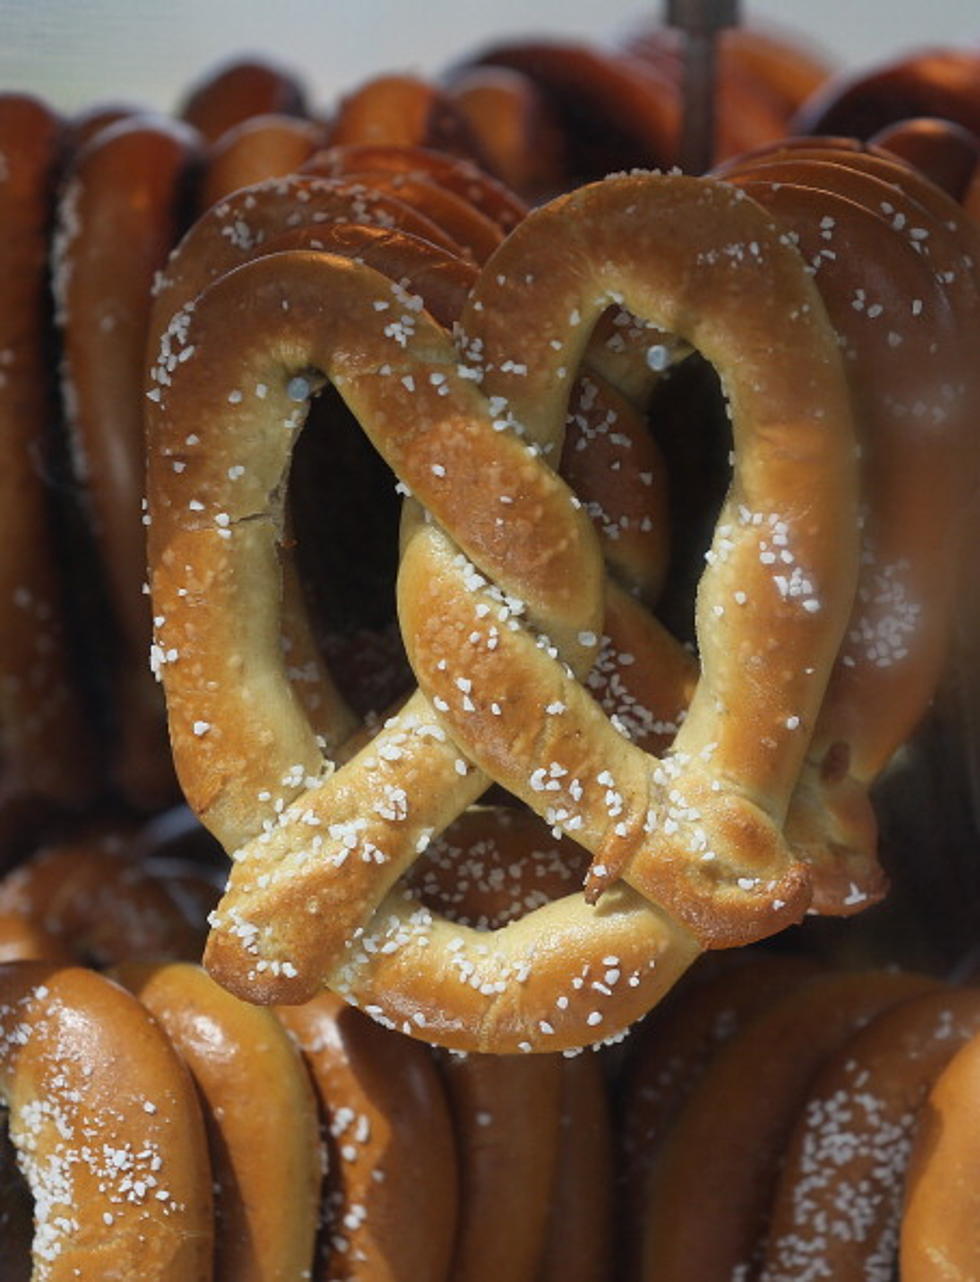 Leukemia and Lymphoma Society to Benefit From Free Pretzel Giveaway [Audio]